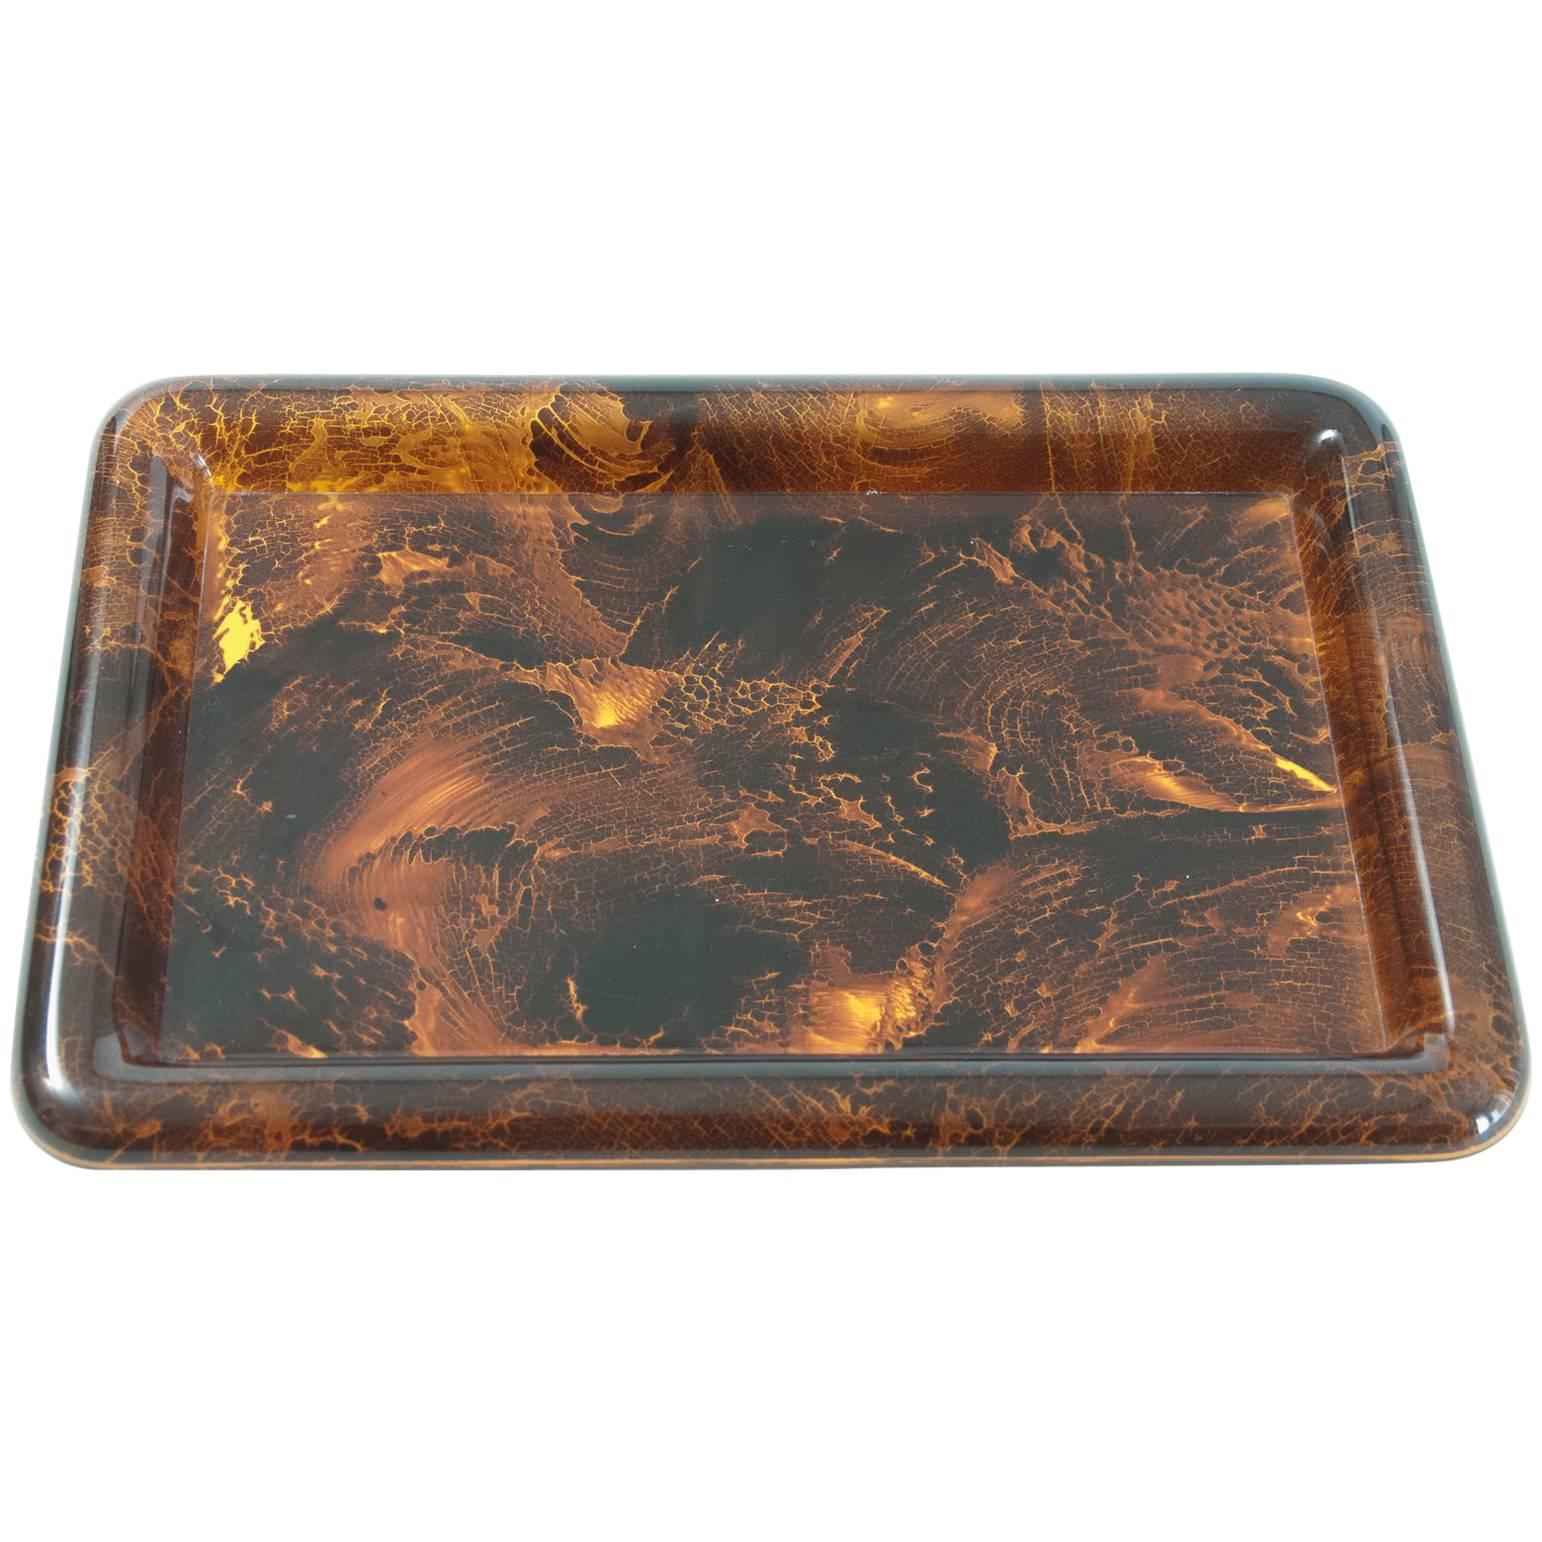 Midcentury Faux Tortoiseshell Tray by Christian Dior with Original Label